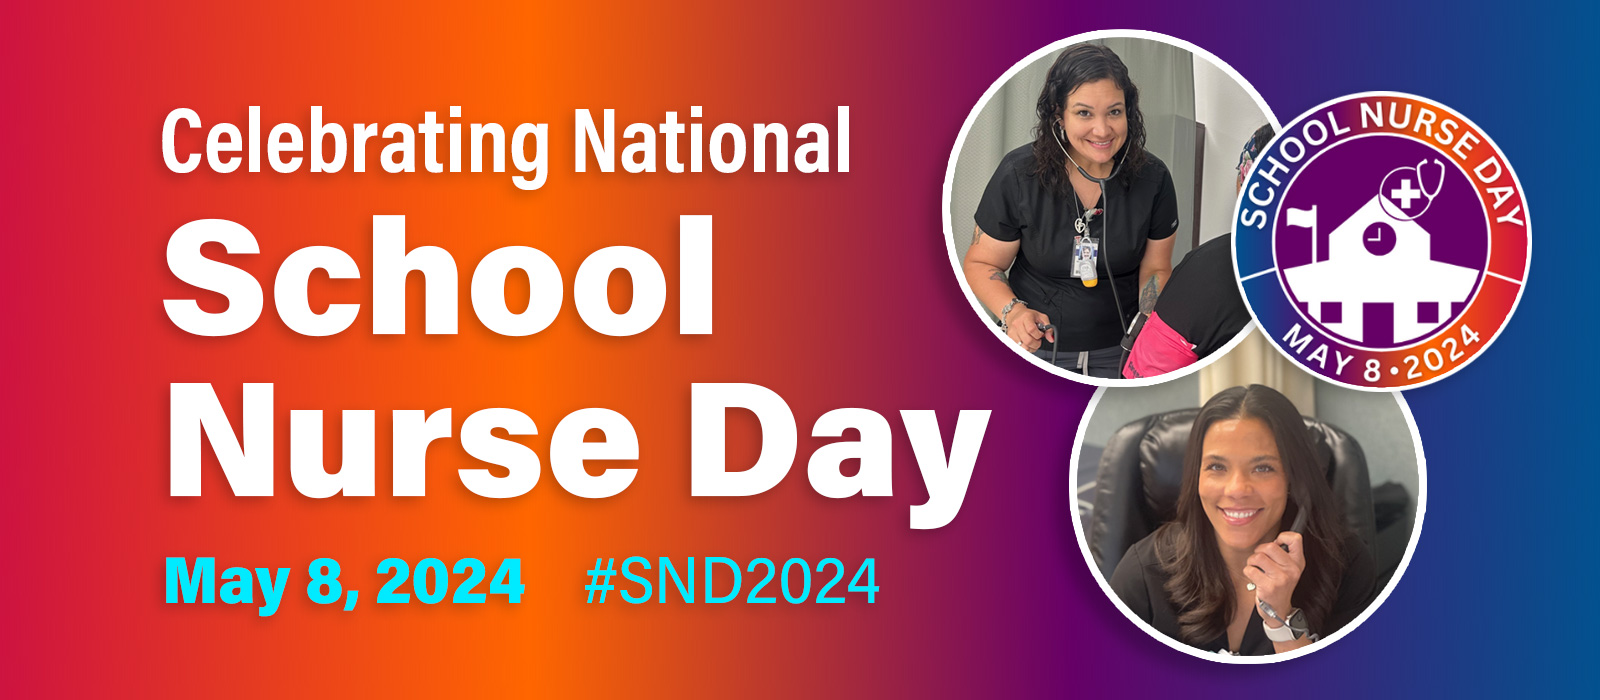 NISD nurses are a beacon of care and compassion for students and staff